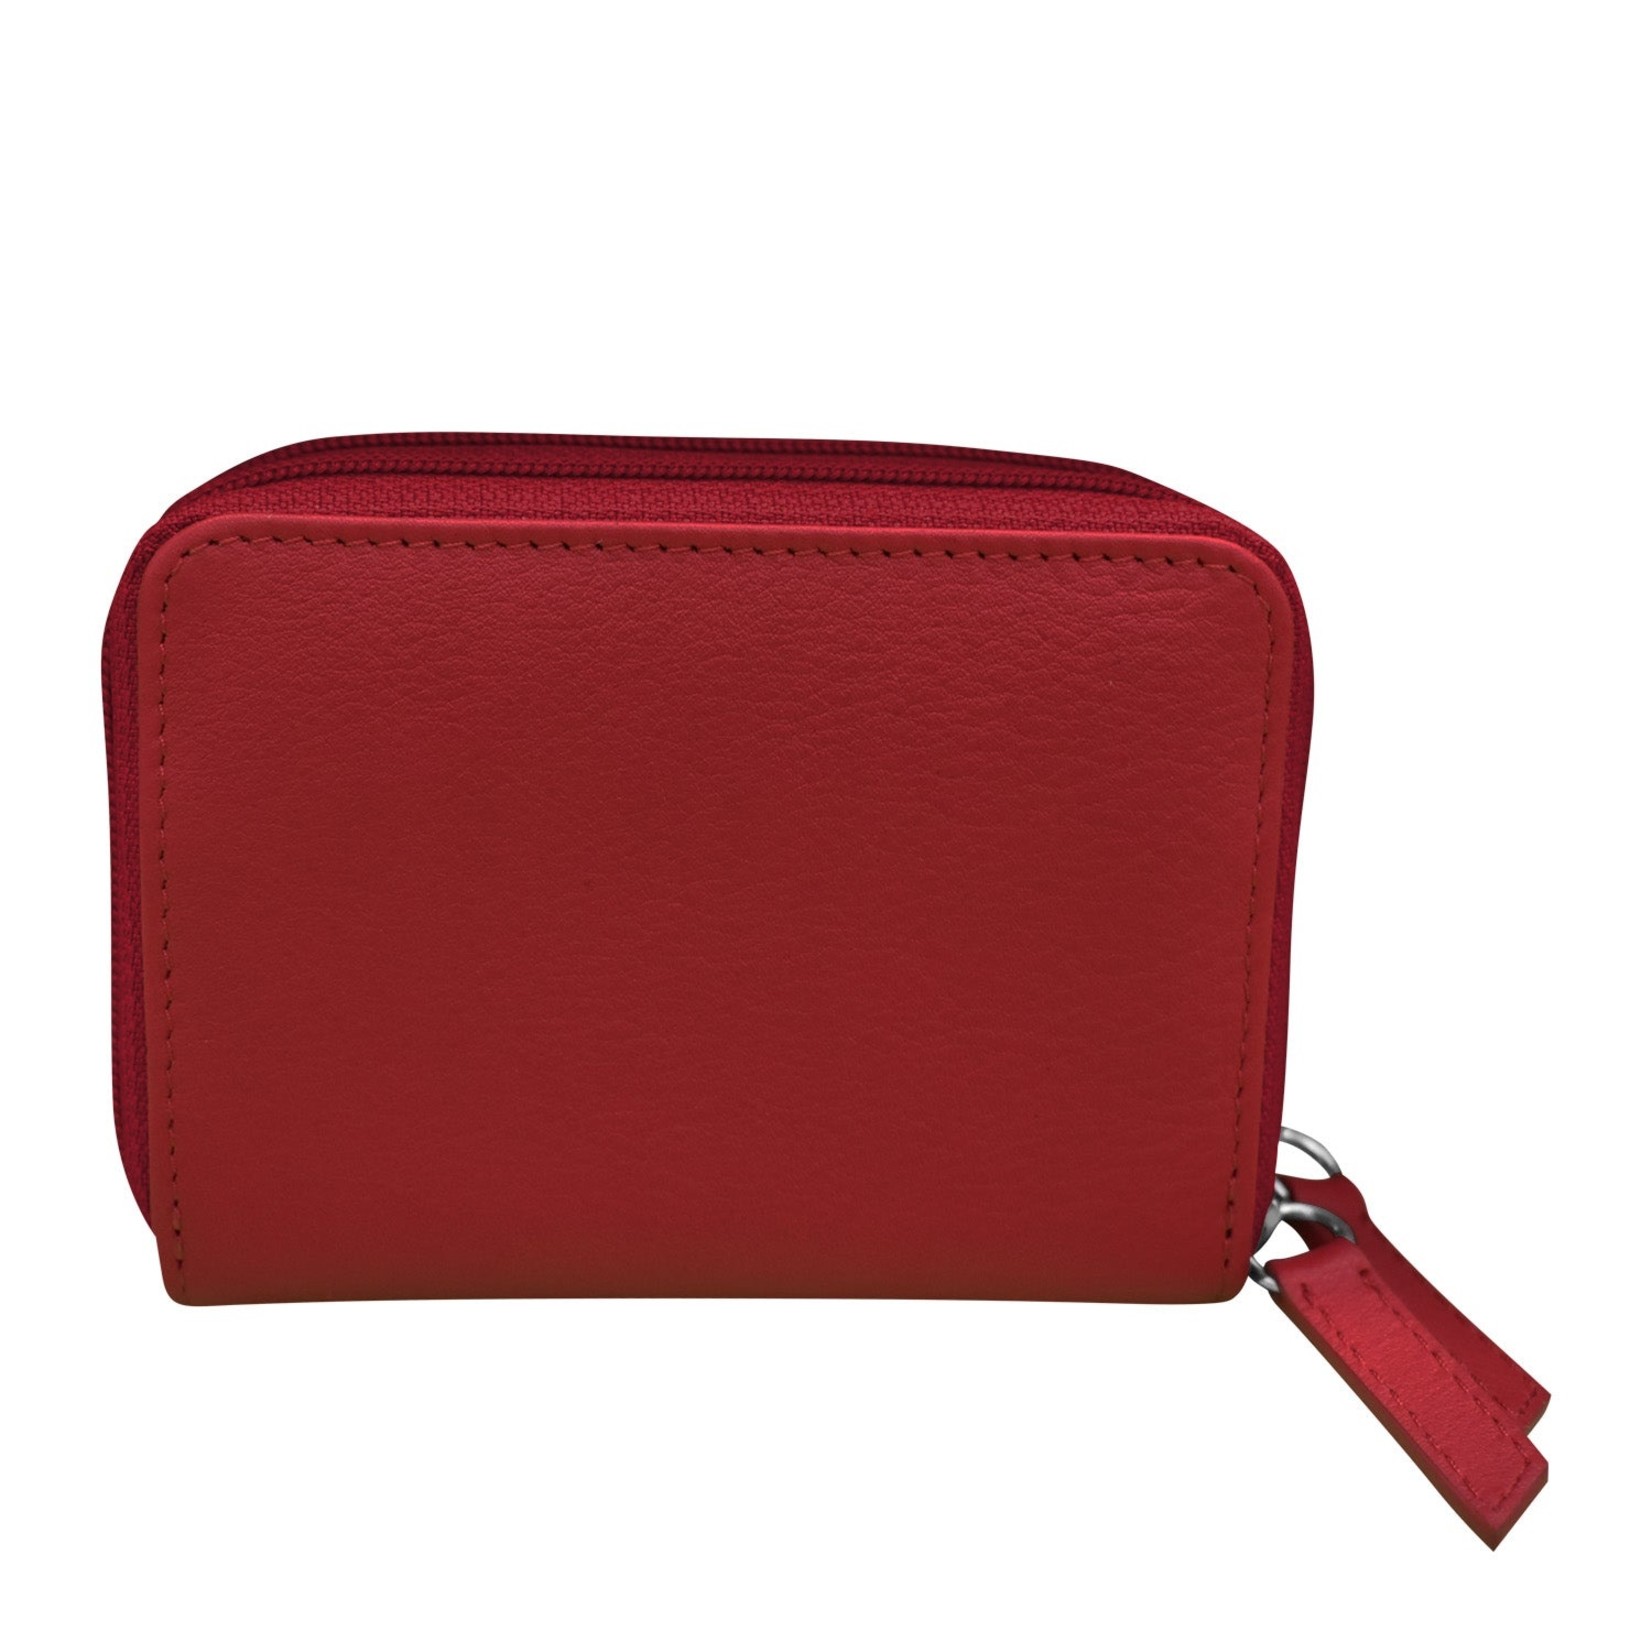 Leather Handbags and Accessories 6714 Red - RFID Double Zip Accordion Card Holder